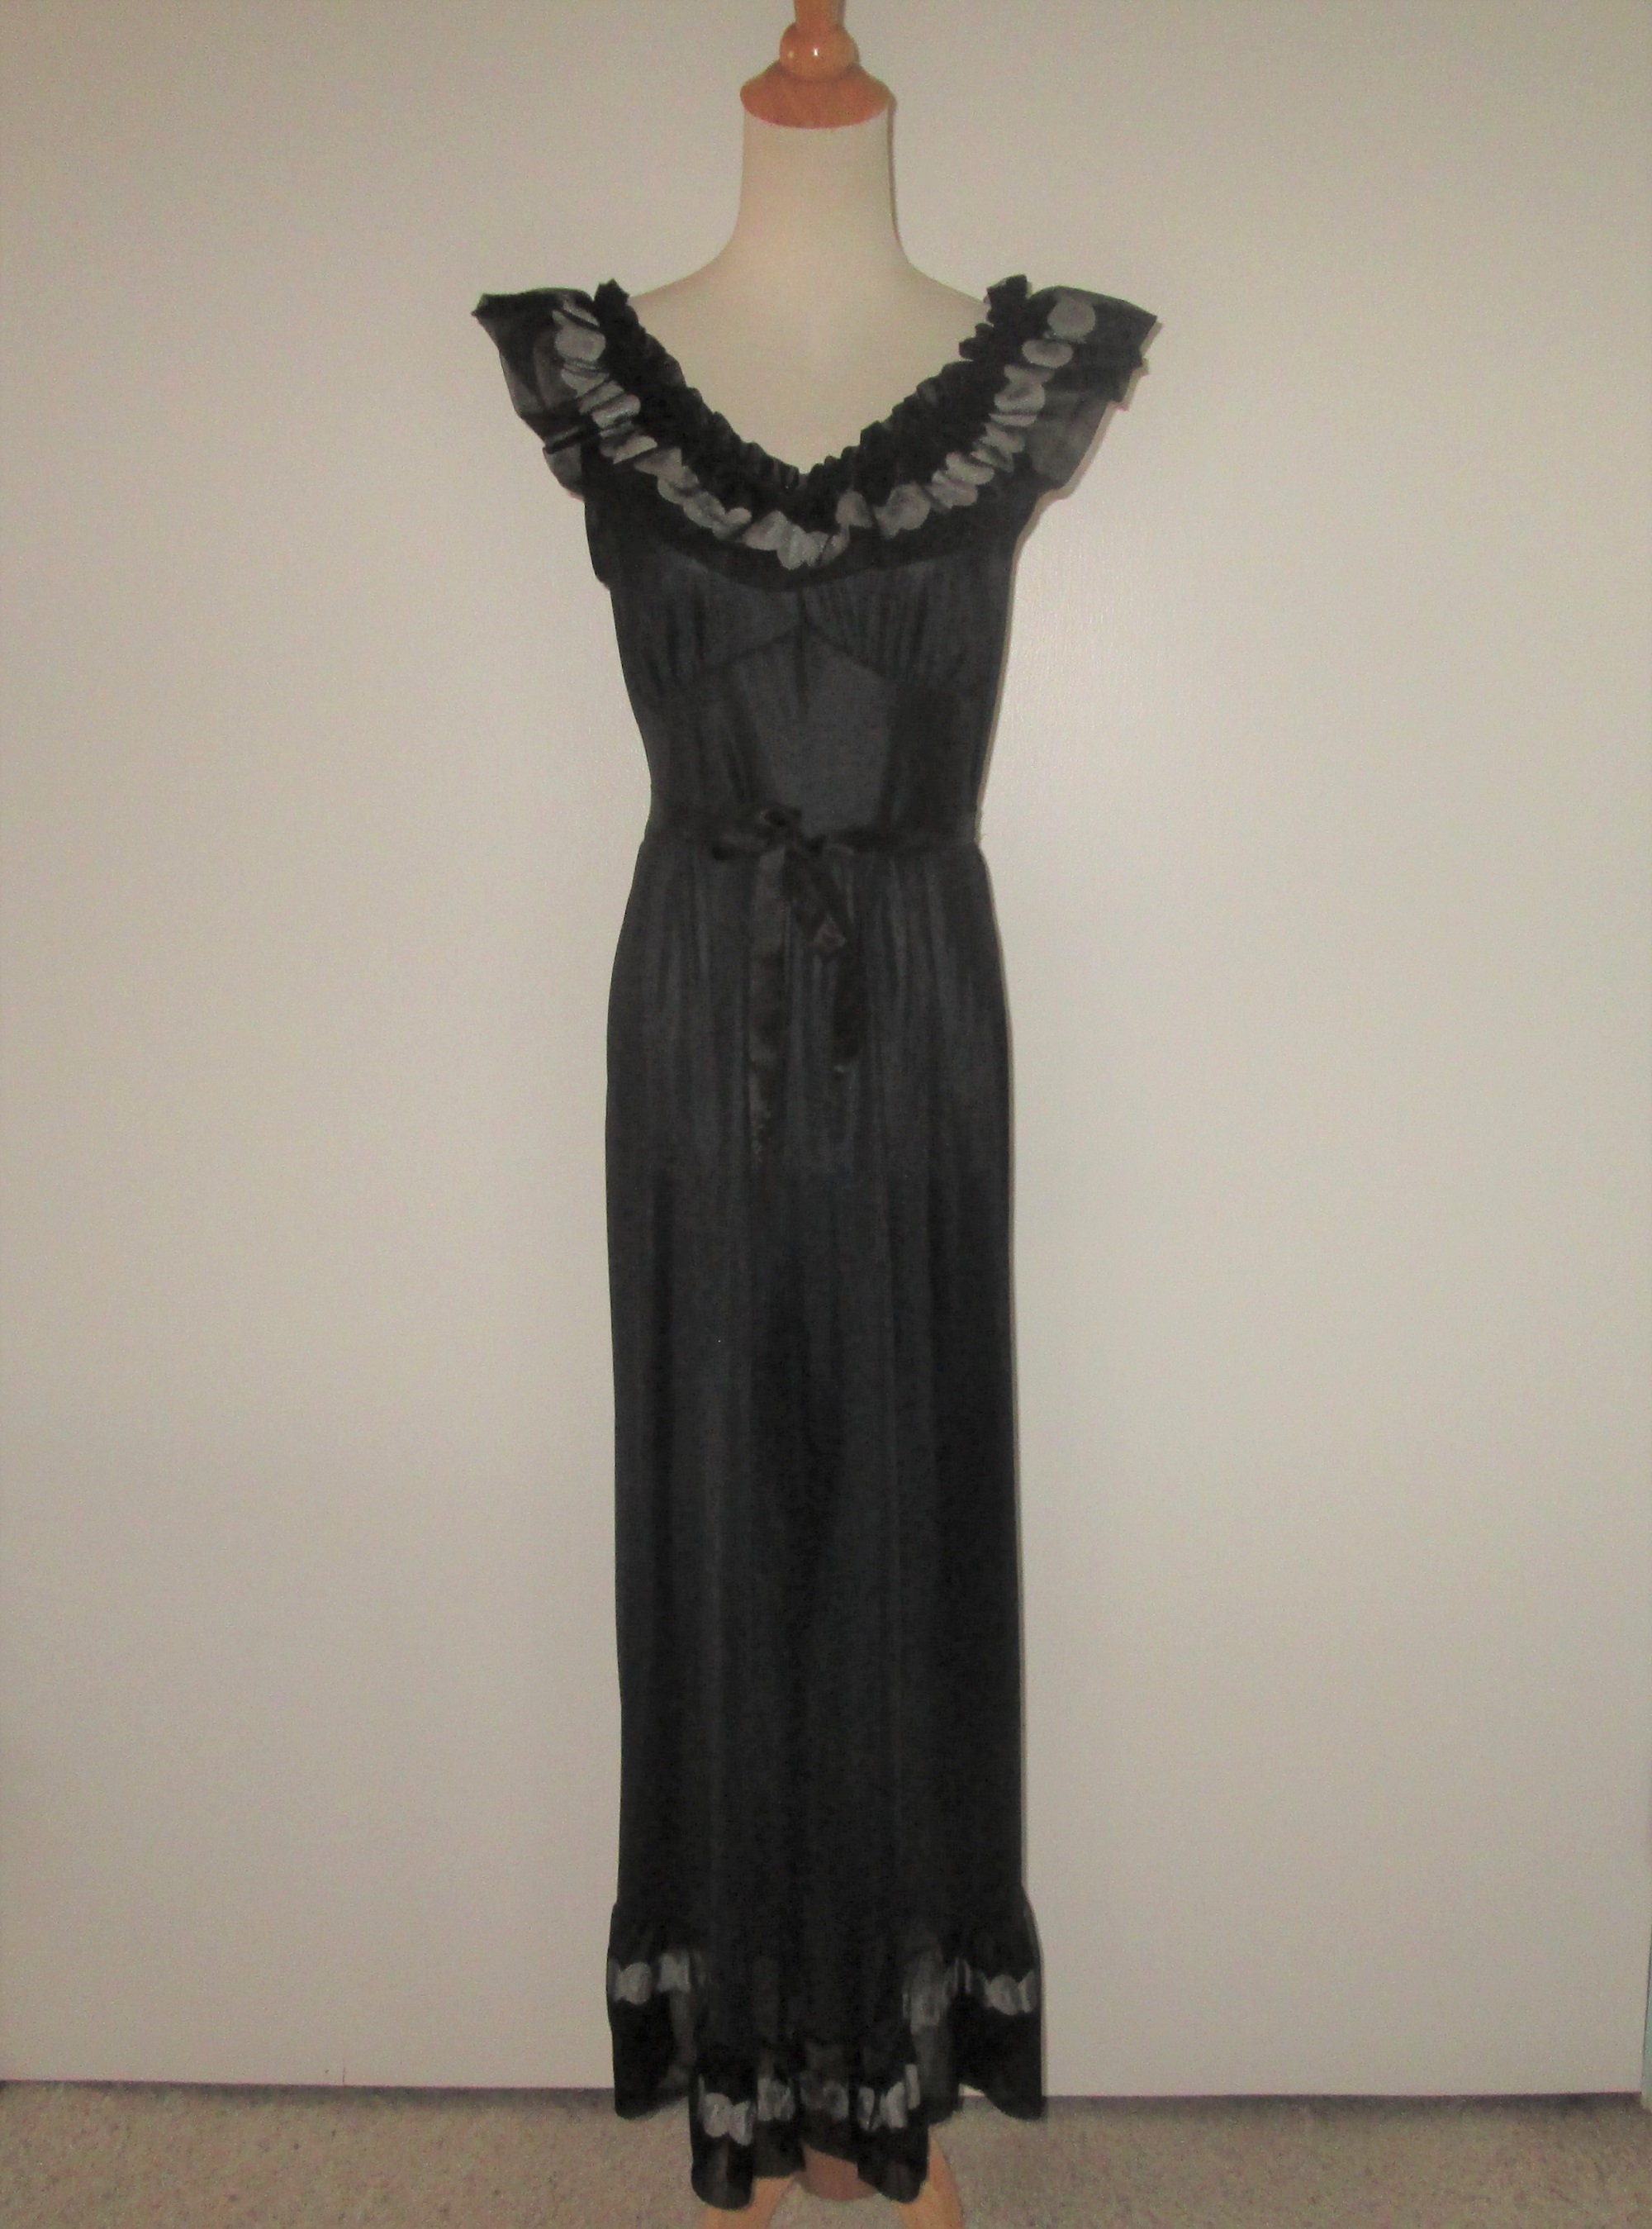 Vintage 1950s Black Nightgown With Hearts by Lovely Lingerie - Etsy